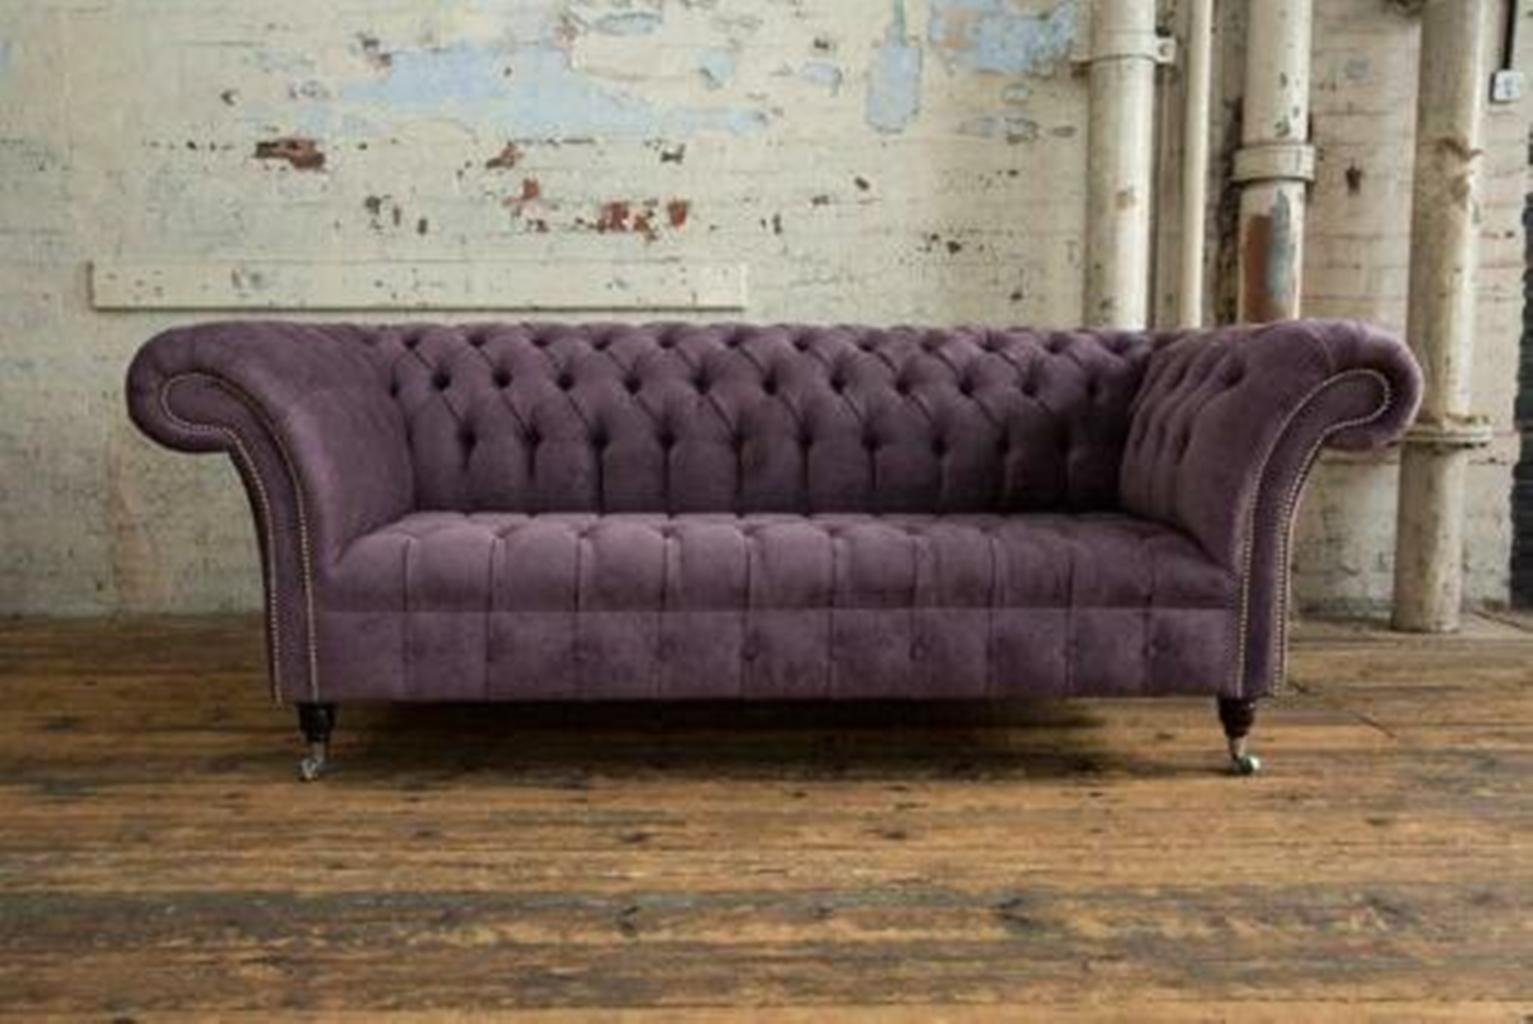 JVmoebel Chesterfield-Sofa, Chesterfield 3 Sitzer Couch Polster Sitz Textil Stoff